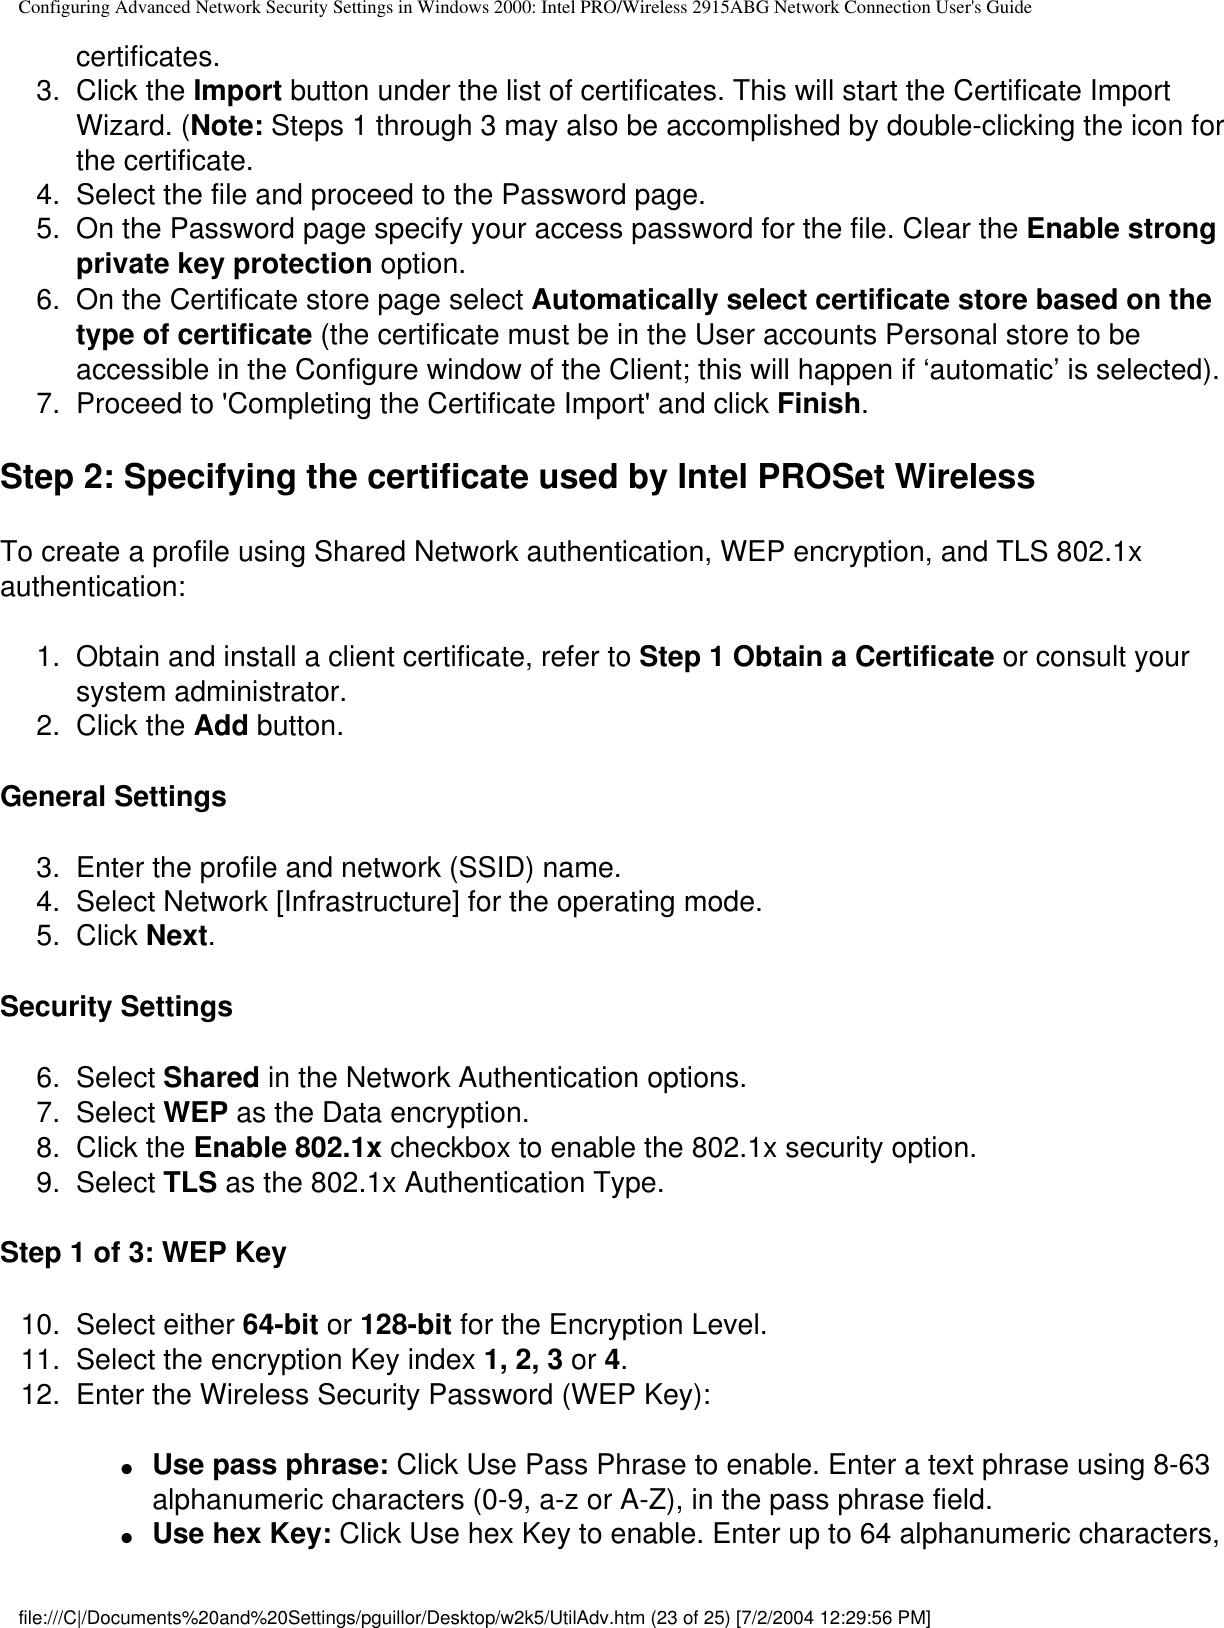 Configuring Advanced Network Security Settings in Windows 2000: Intel PRO/Wireless 2915ABG Network Connection User&apos;s Guidecertificates. 3.  Click the Import button under the list of certificates. This will start the Certificate Import Wizard. (Note: Steps 1 through 3 may also be accomplished by double-clicking the icon for the certificate. 4.  Select the file and proceed to the Password page. 5.  On the Password page specify your access password for the file. Clear the Enable strong private key protection option. 6.  On the Certificate store page select Automatically select certificate store based on the type of certificate (the certificate must be in the User accounts Personal store to be accessible in the Configure window of the Client; this will happen if ‘automatic’ is selected). 7.  Proceed to &apos;Completing the Certificate Import&apos; and click Finish.Step 2: Specifying the certificate used by Intel PROSet WirelessTo create a profile using Shared Network authentication, WEP encryption, and TLS 802.1x authentication: 1.  Obtain and install a client certificate, refer to Step 1 Obtain a Certificate or consult your system administrator. 2.  Click the Add button.General Settings3.  Enter the profile and network (SSID) name. 4.  Select Network [Infrastructure] for the operating mode. 5.  Click Next.Security Settings6.  Select Shared in the Network Authentication options. 7.  Select WEP as the Data encryption. 8.  Click the Enable 802.1x checkbox to enable the 802.1x security option. 9.  Select TLS as the 802.1x Authentication Type. Step 1 of 3: WEP Key10.  Select either 64-bit or 128-bit for the Encryption Level. 11.  Select the encryption Key index 1, 2, 3 or 4. 12.  Enter the Wireless Security Password (WEP Key):●     Use pass phrase: Click Use Pass Phrase to enable. Enter a text phrase using 8-63 alphanumeric characters (0-9, a-z or A-Z), in the pass phrase field. ●     Use hex Key: Click Use hex Key to enable. Enter up to 64 alphanumeric characters, file:///C|/Documents%20and%20Settings/pguillor/Desktop/w2k5/UtilAdv.htm (23 of 25) [7/2/2004 12:29:56 PM]